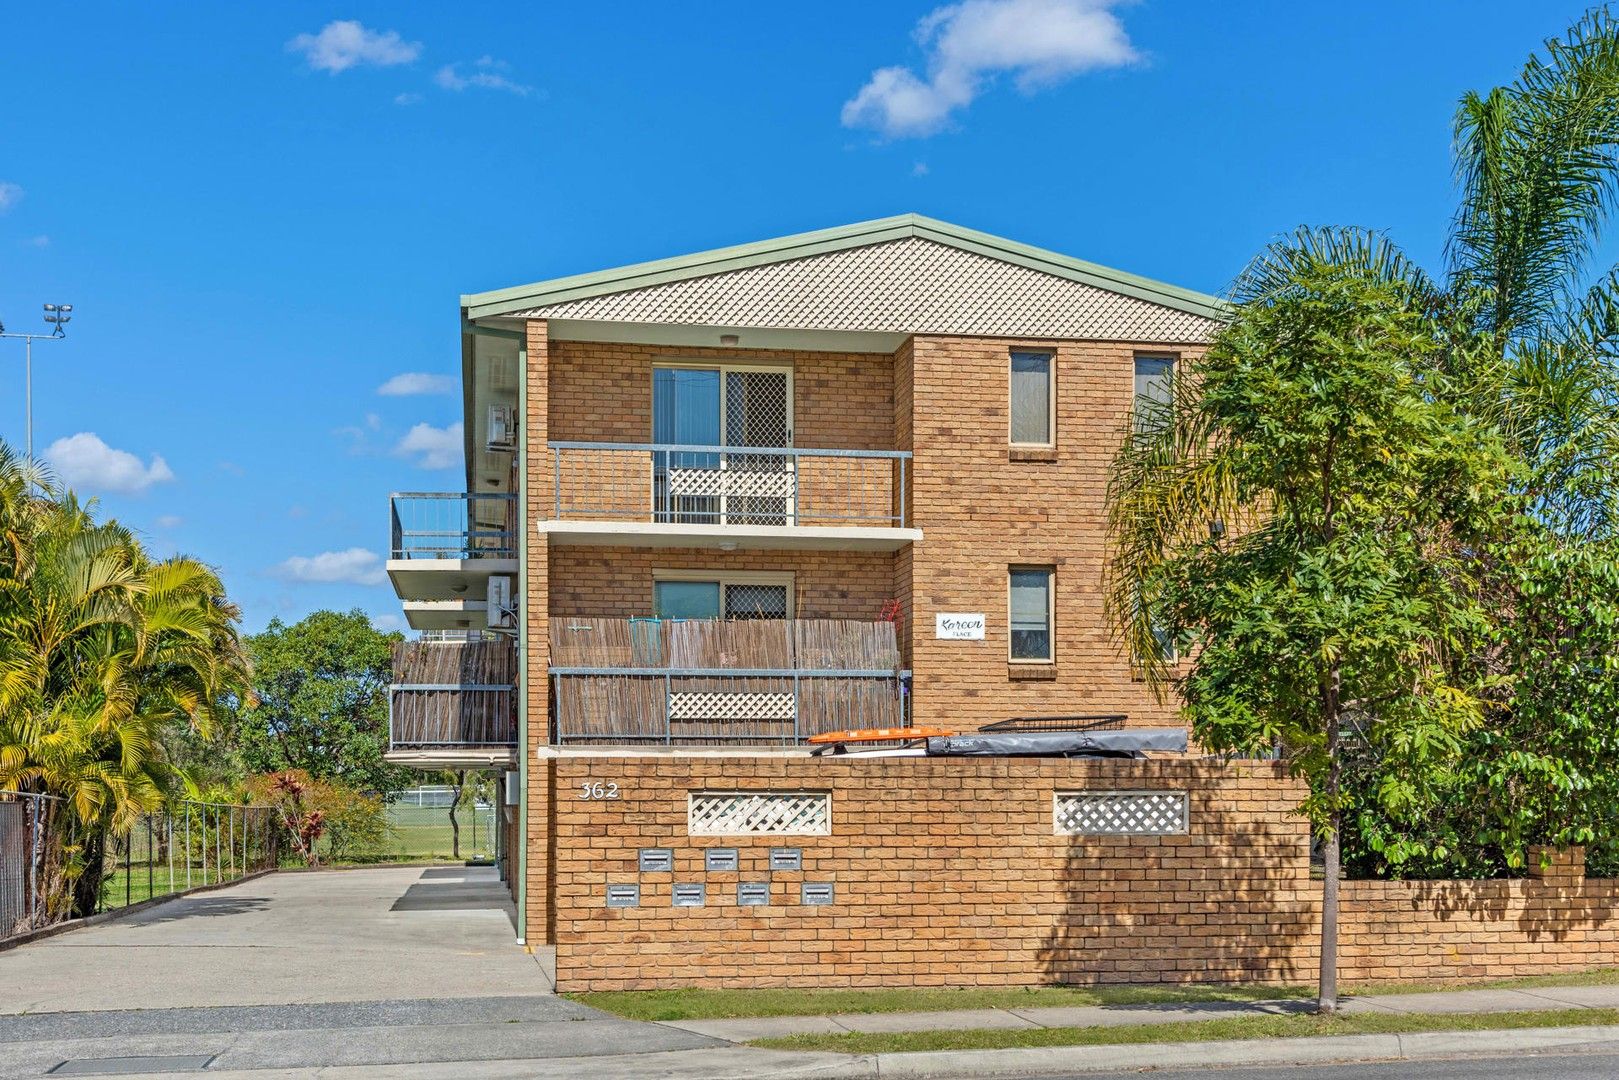 5/362 Zillmere Road, Zillmere QLD 4034, Image 0